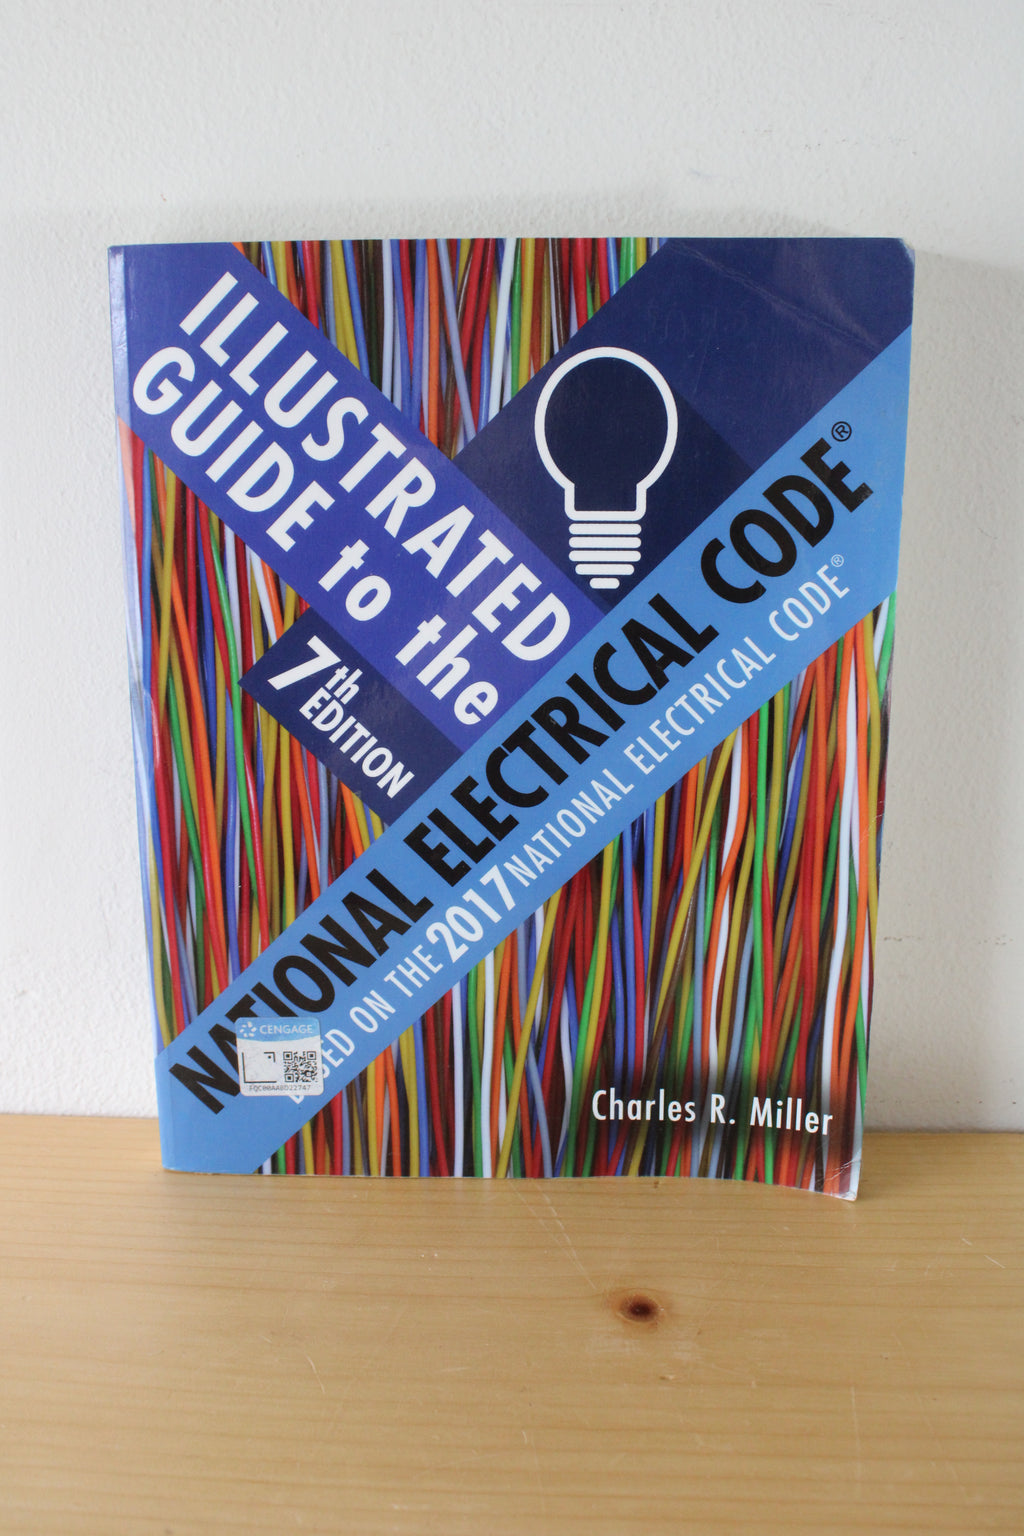 Illustrated Guide To The National Electrical Code 7th Edition By Charles R. Miller